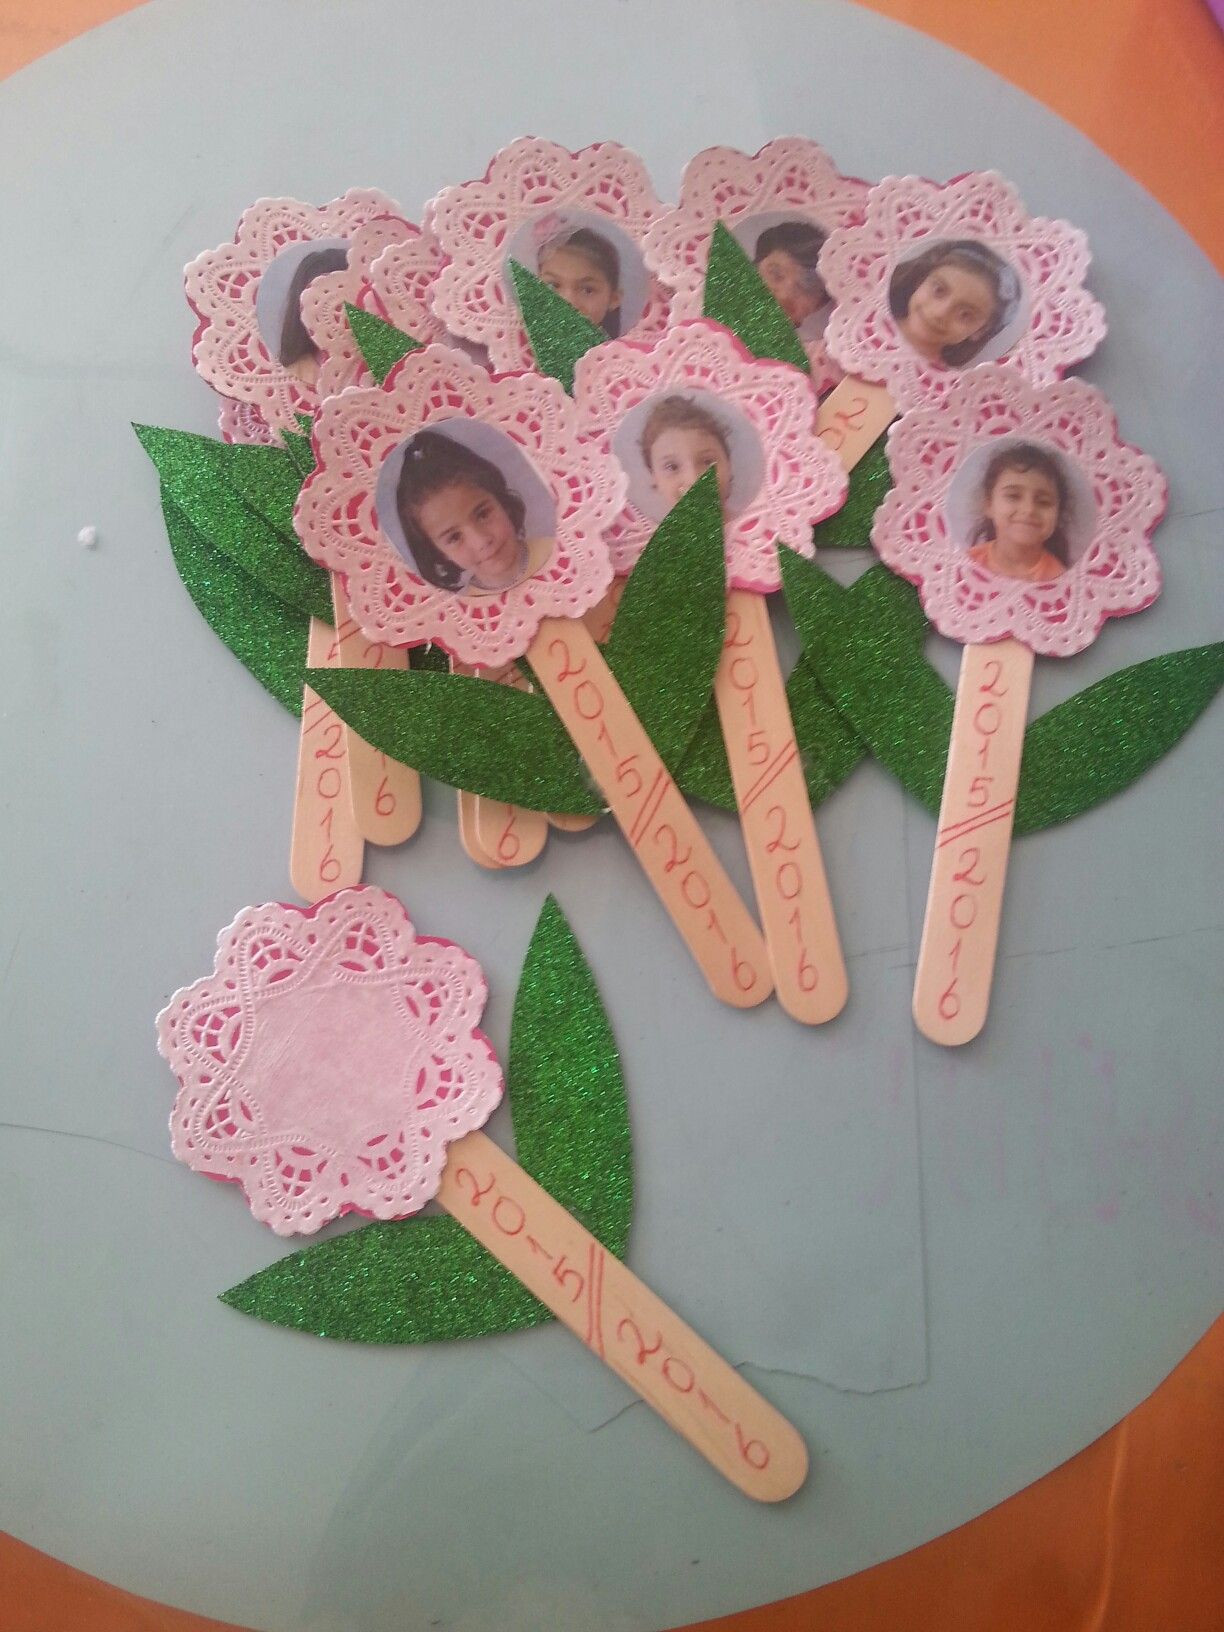 Mothers Day Craft For Children
 10 Marvellous Mother s Day Crafts For Kids That They ll